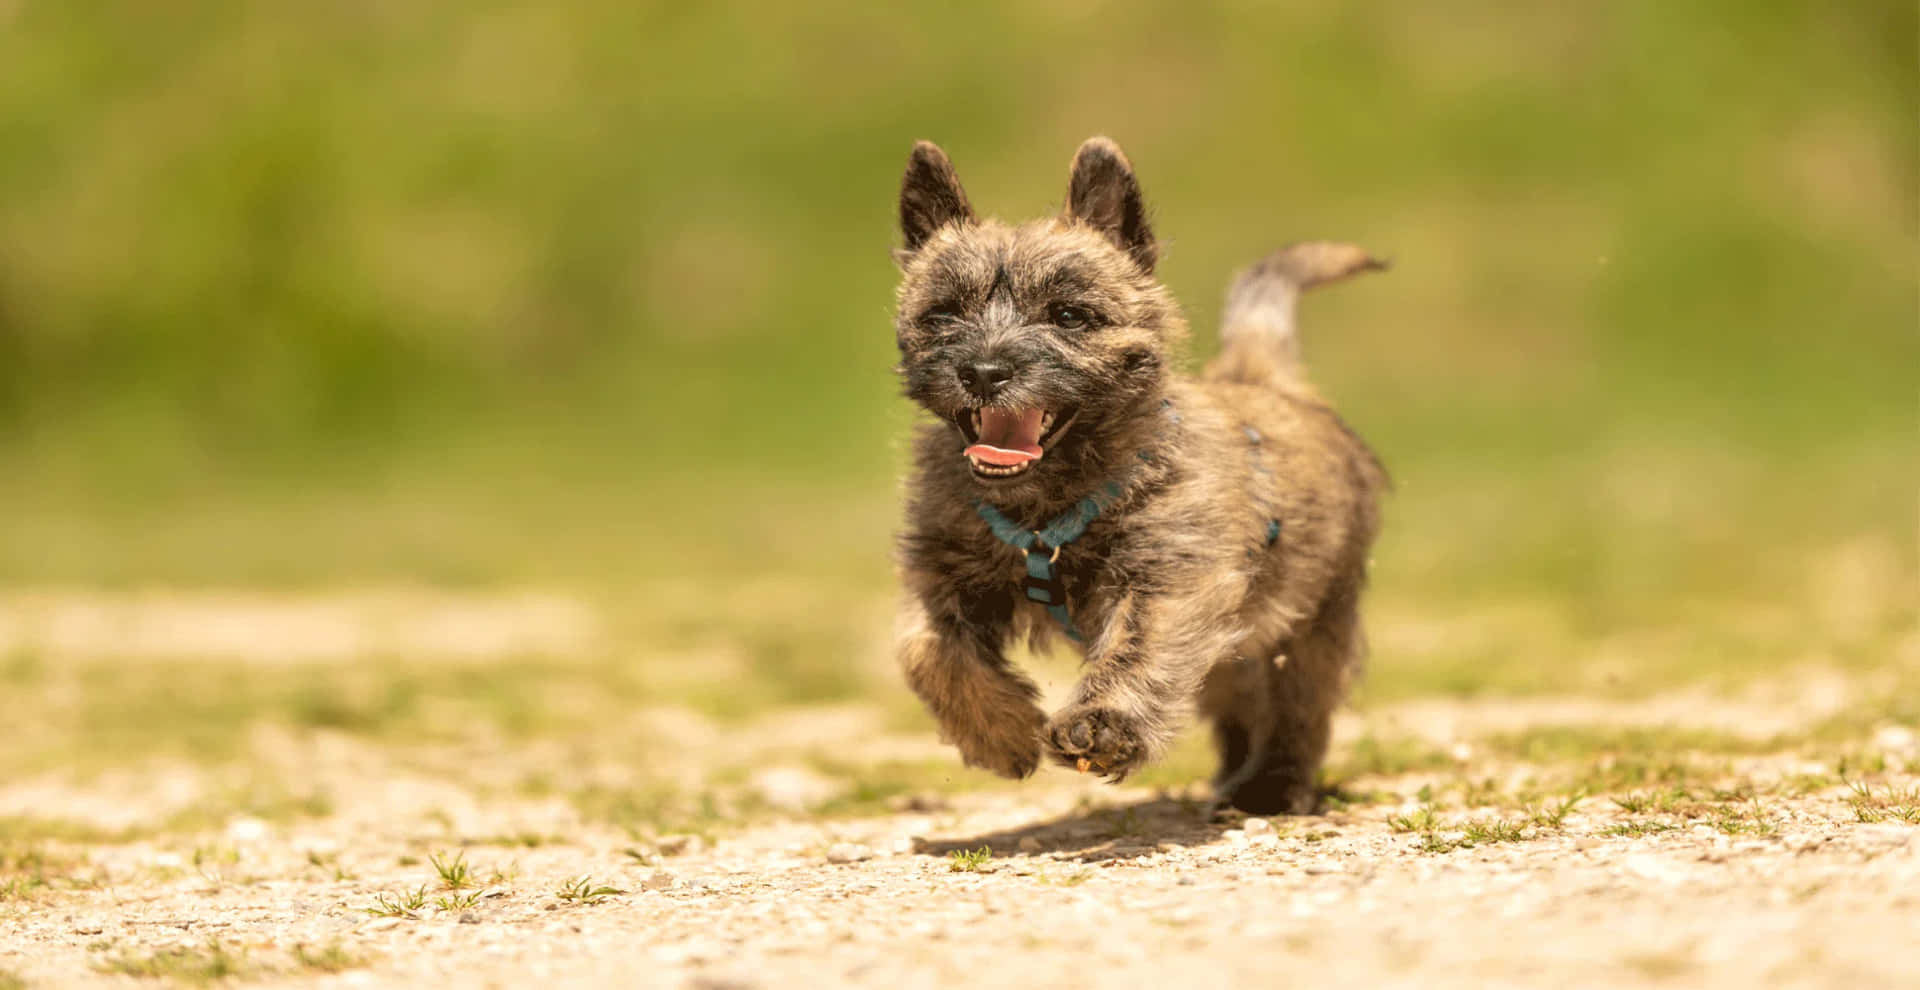 A Small Dog Running On A Dirt Road